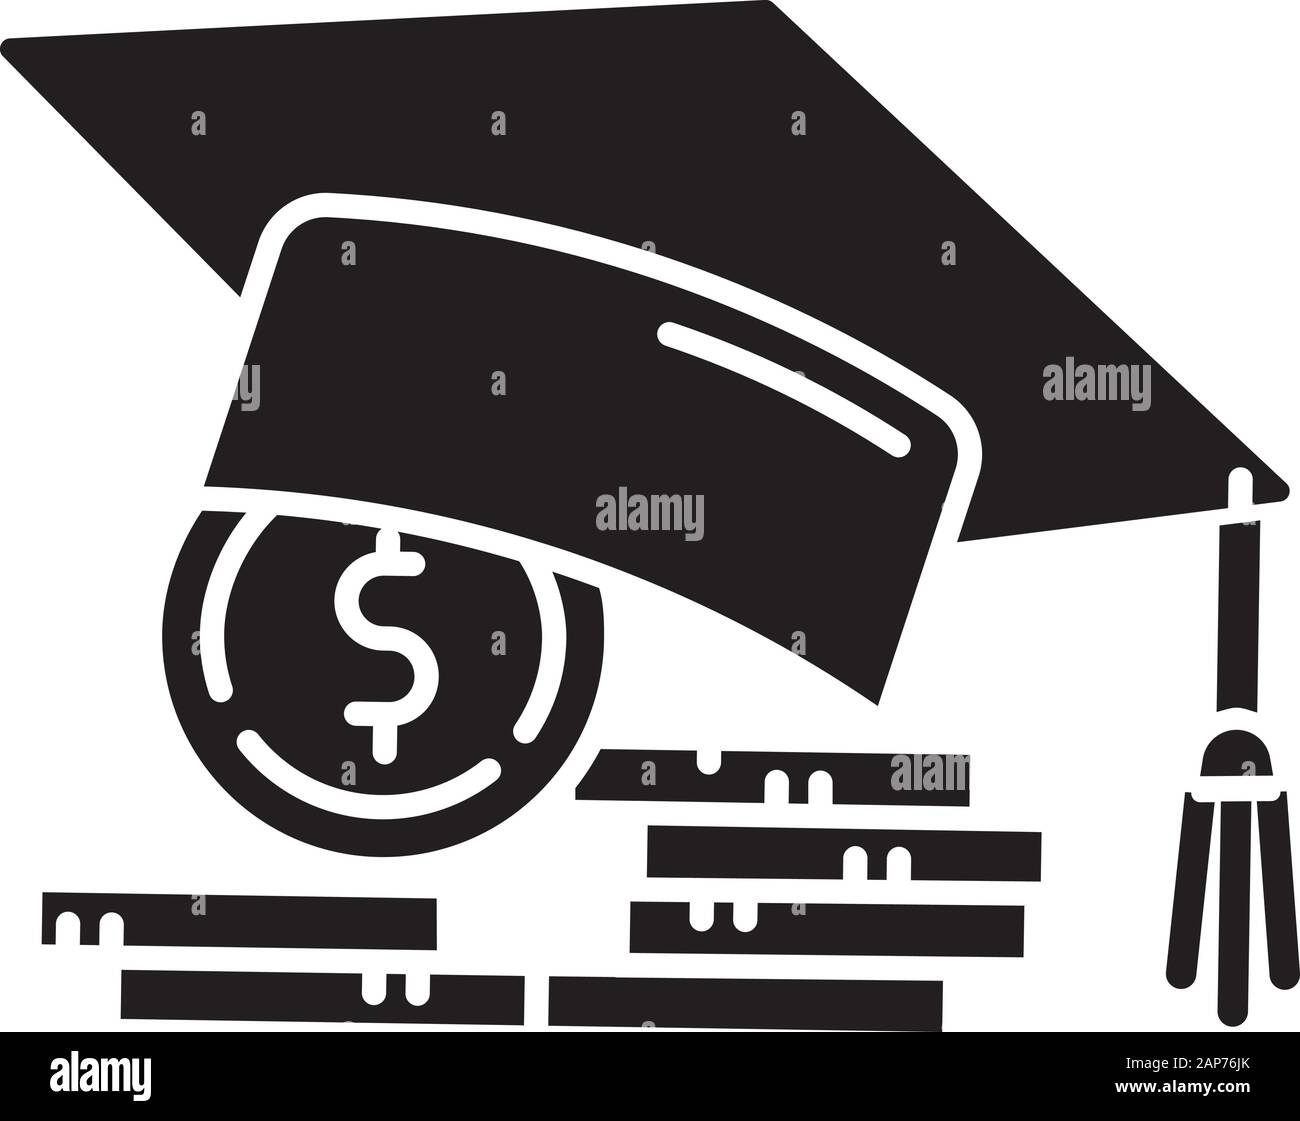 Student loan glyph icon. Credit to pay for university education. Tuition fee. College scolarship. Graduation hat, coin stack. Silhouette symbol. Negat Stock Vector